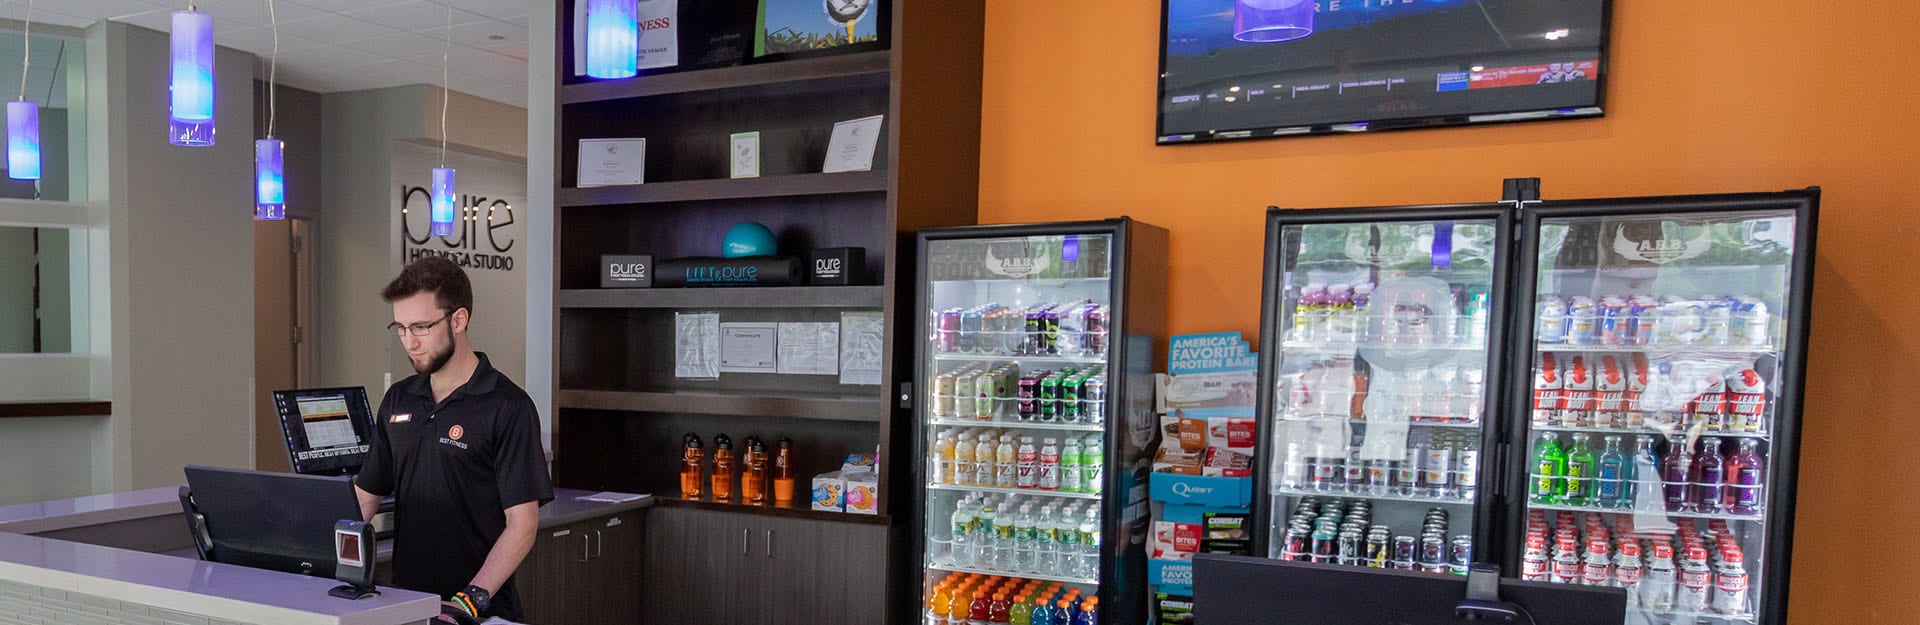 shop with beverages and merchandise in modern gym